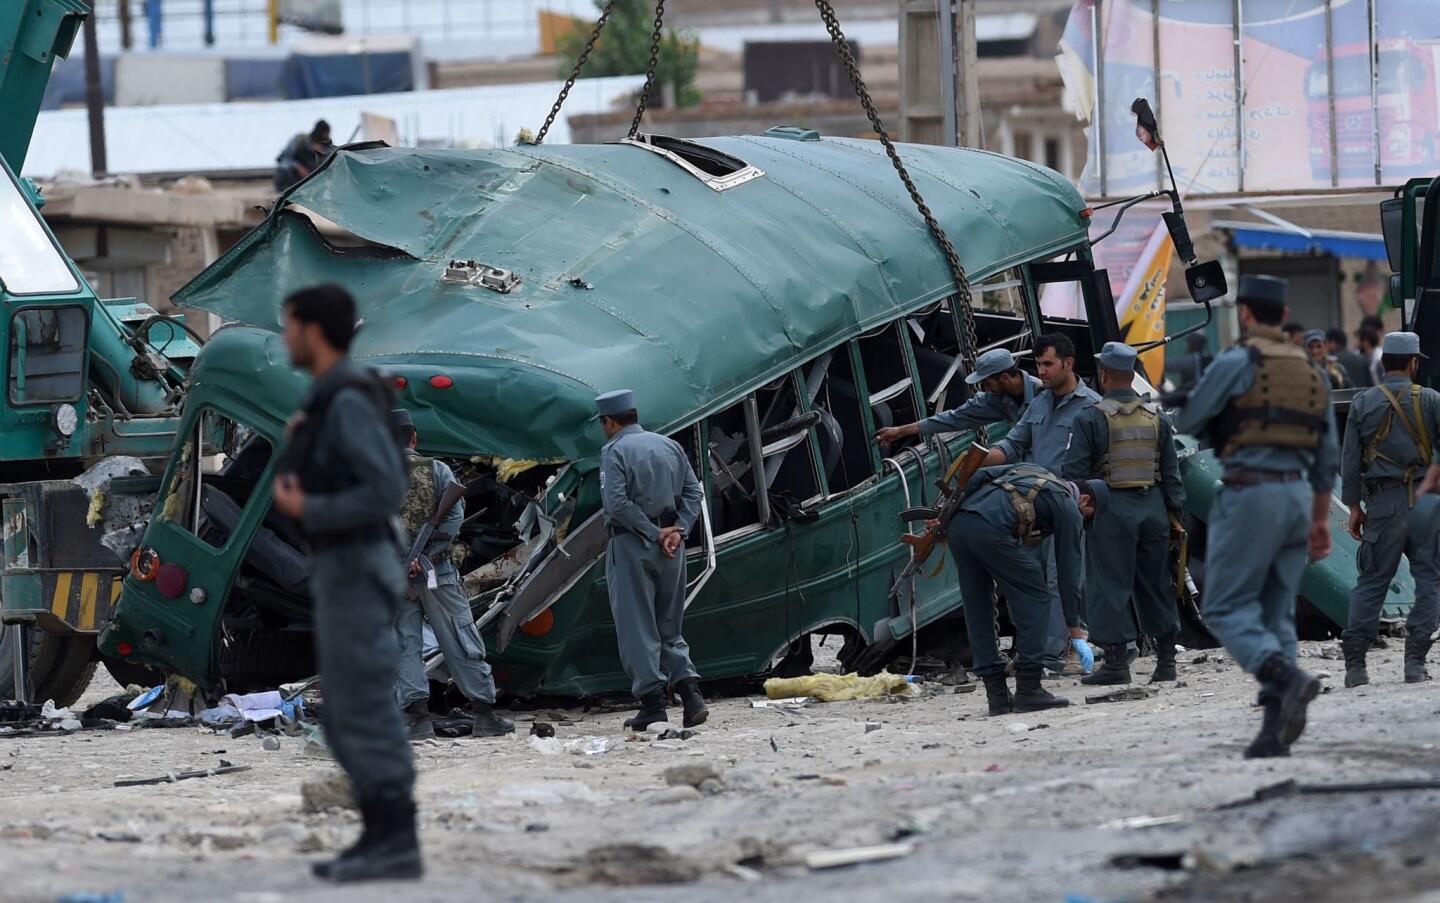 Taliban suicide bombers attack buses filled with police cadets in Kabul